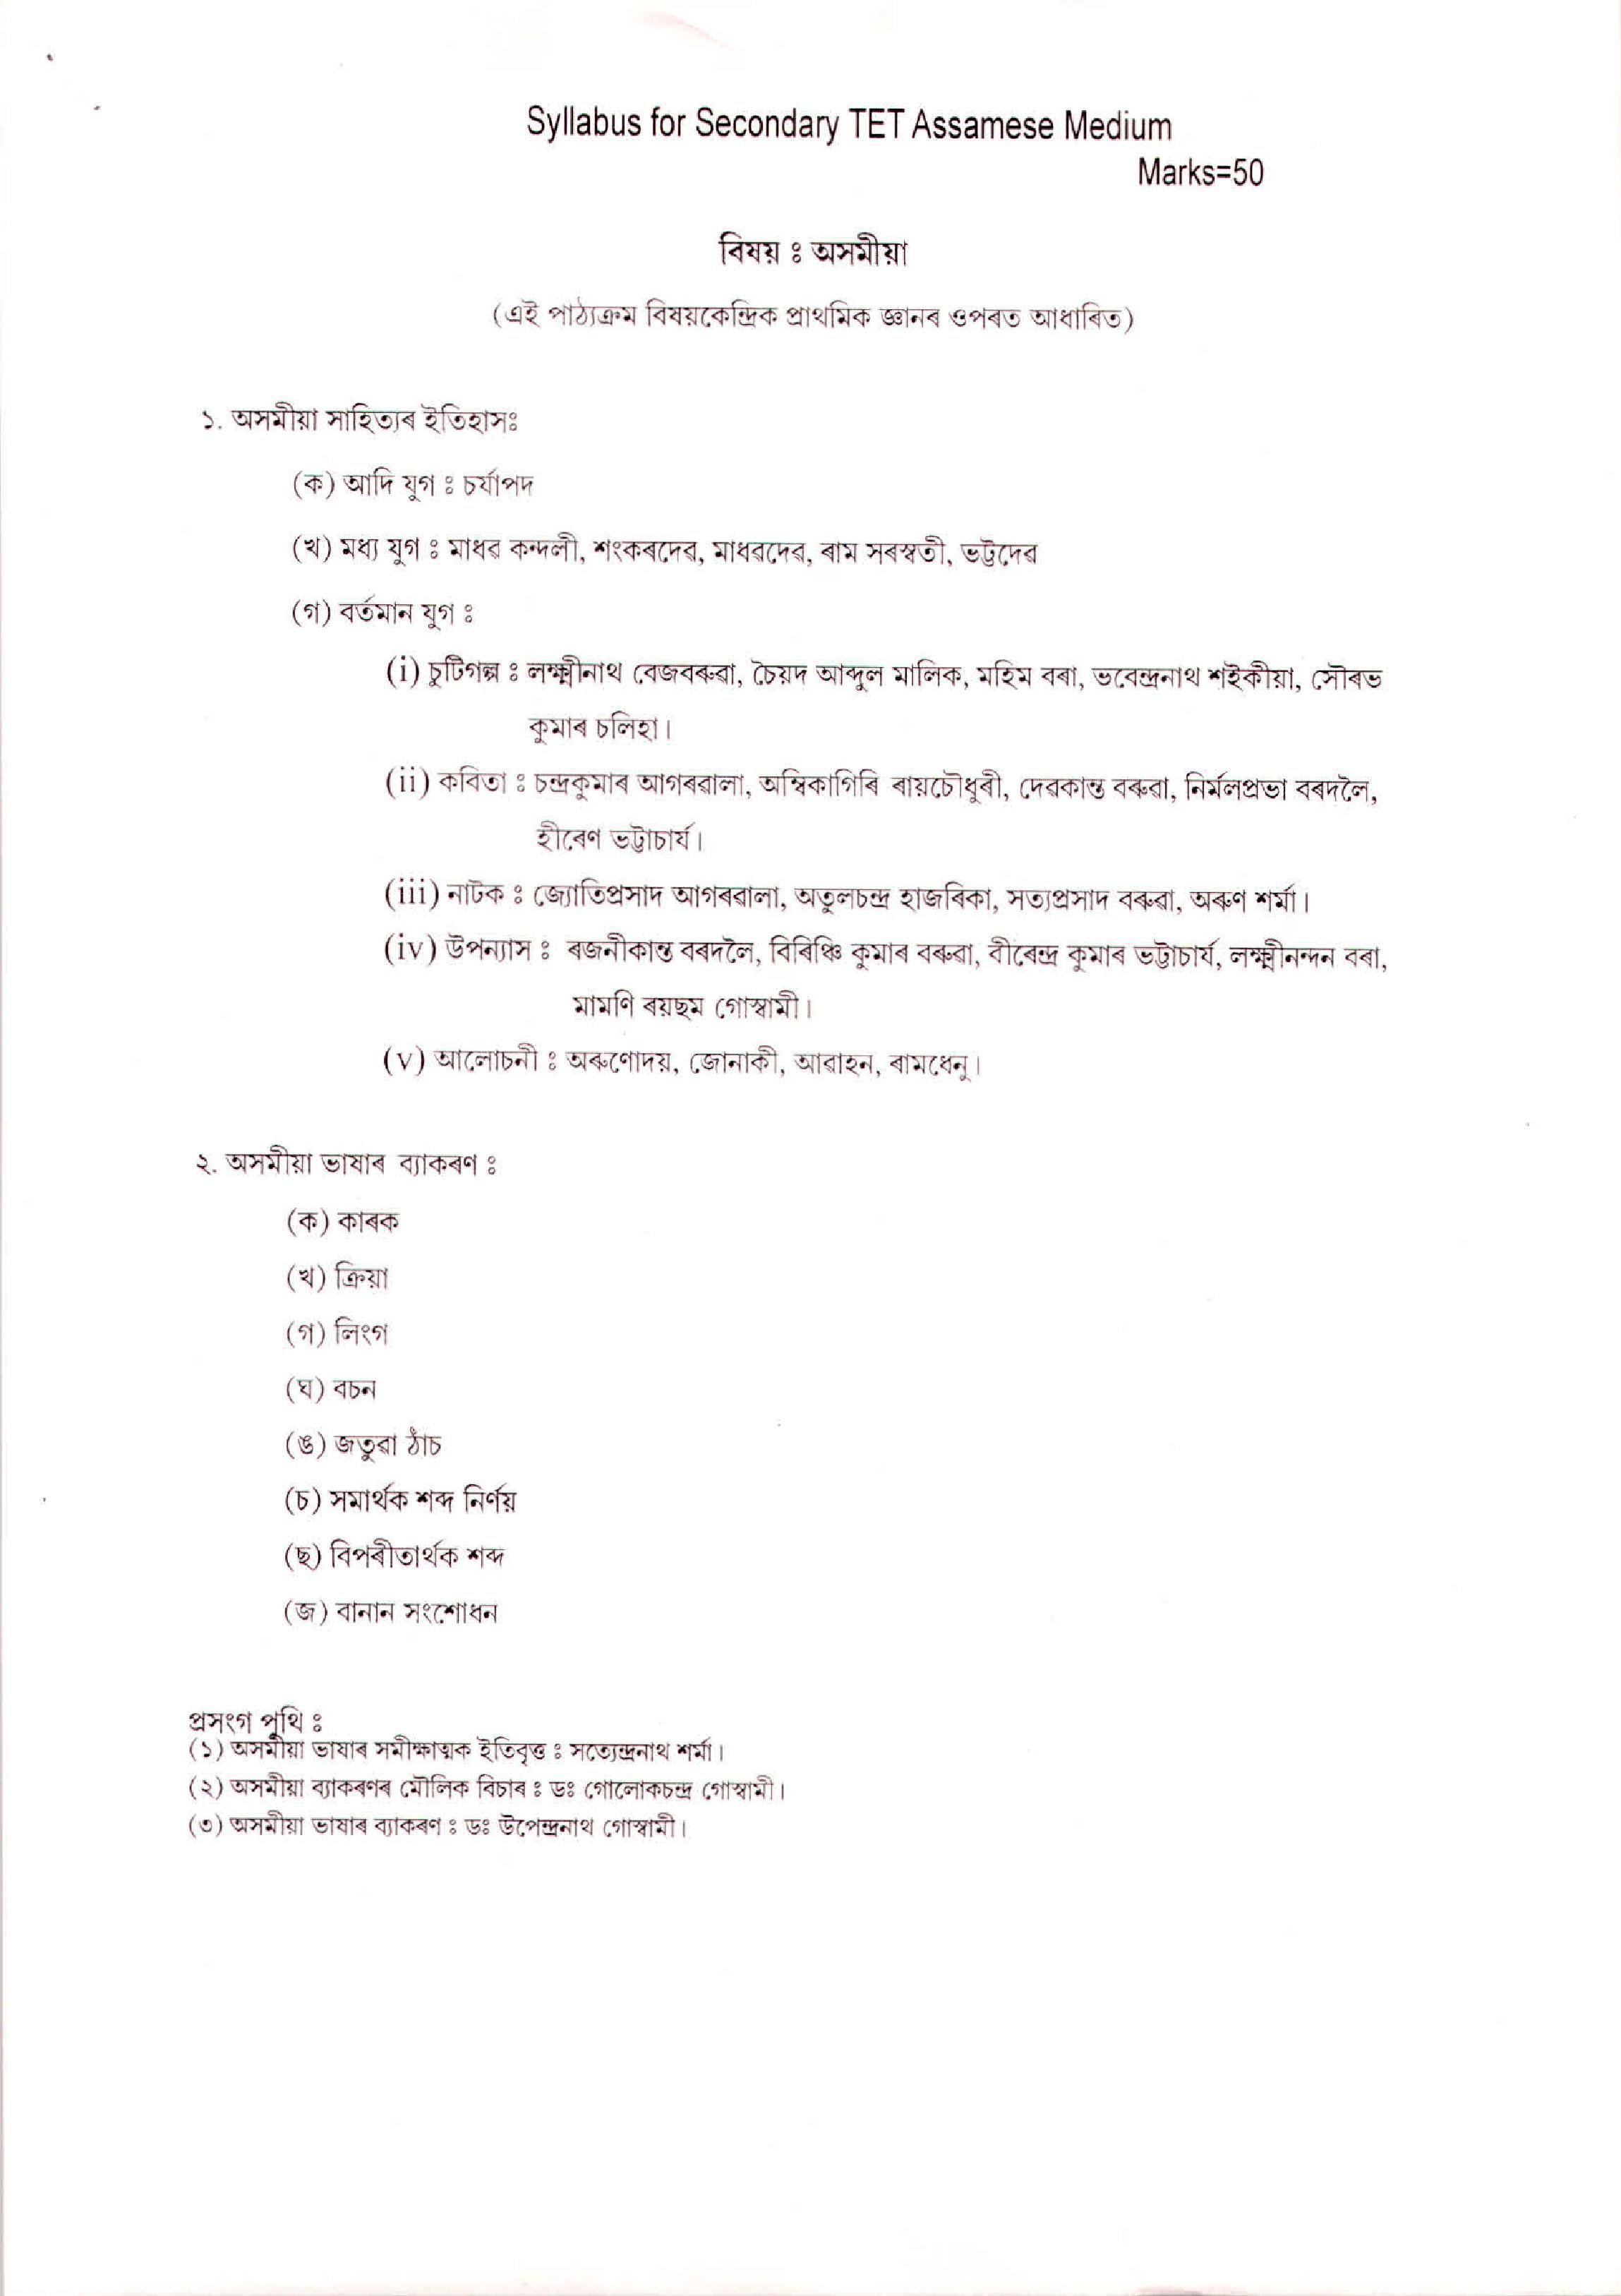 Assam High School TET Syllabus for 2019 - Page 1